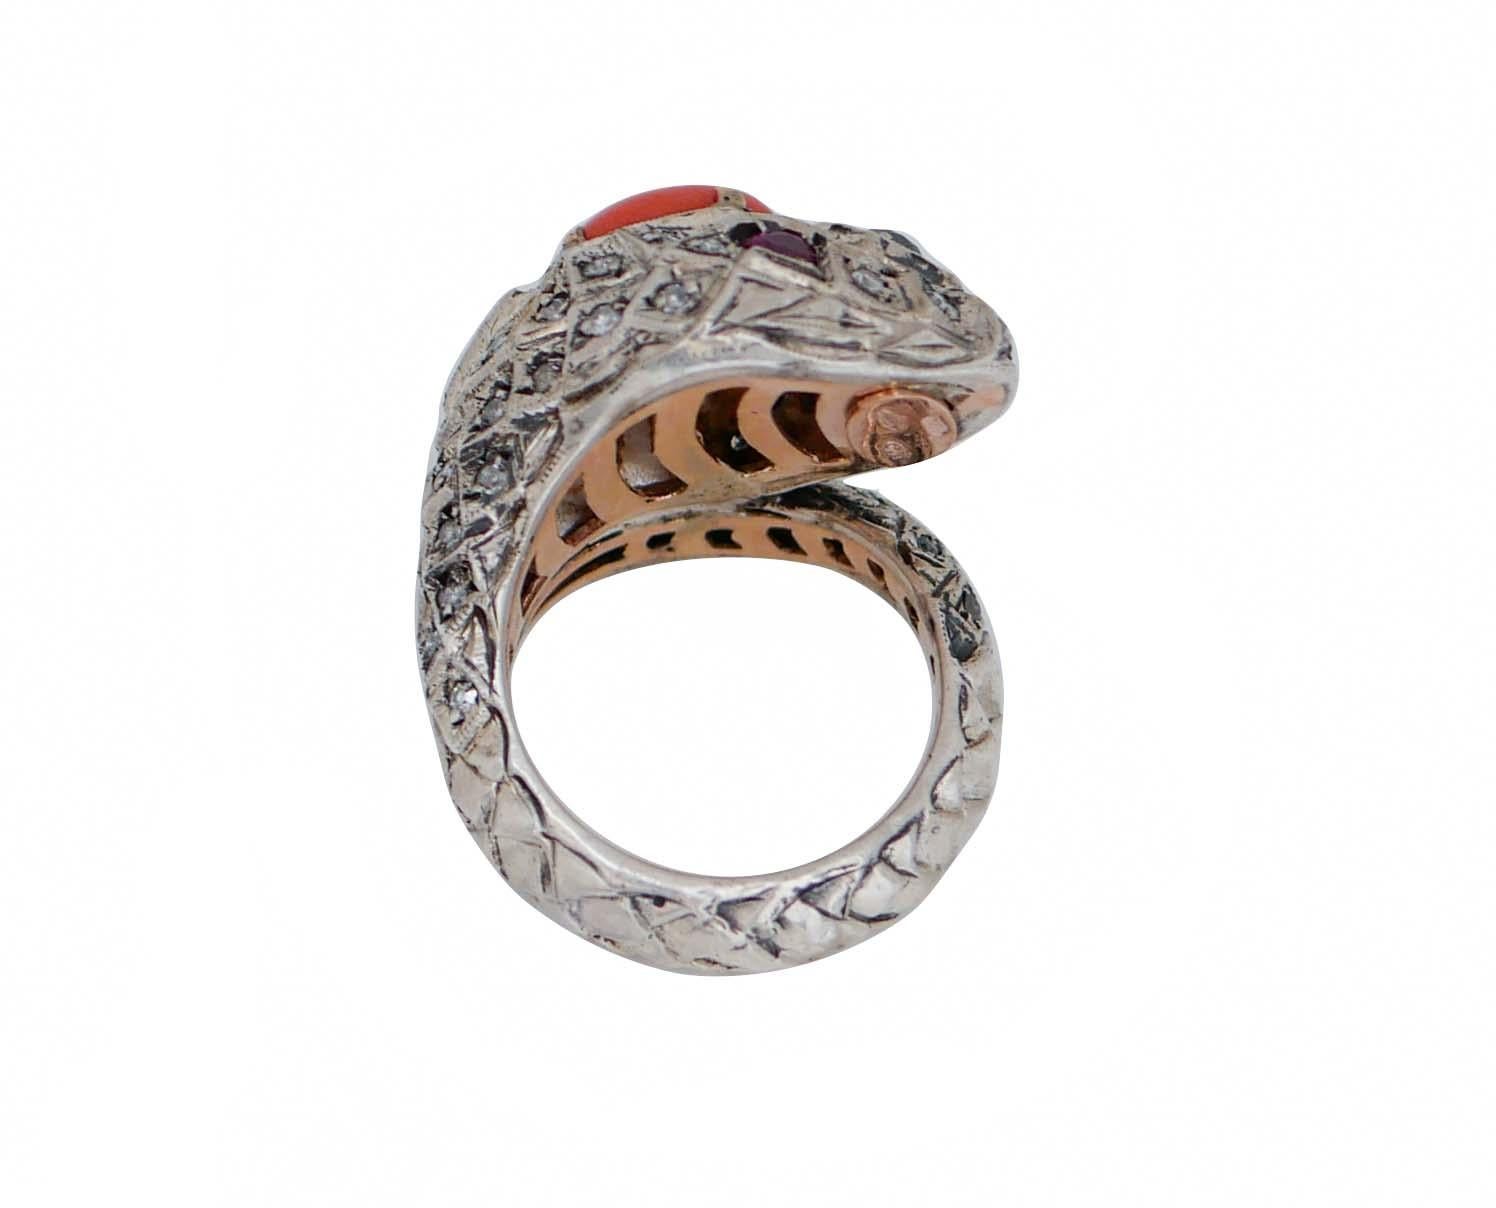 Mixed Cut Coral, Rubies, Diamonds, Rose Gold and Silver Snake Ring. For Sale